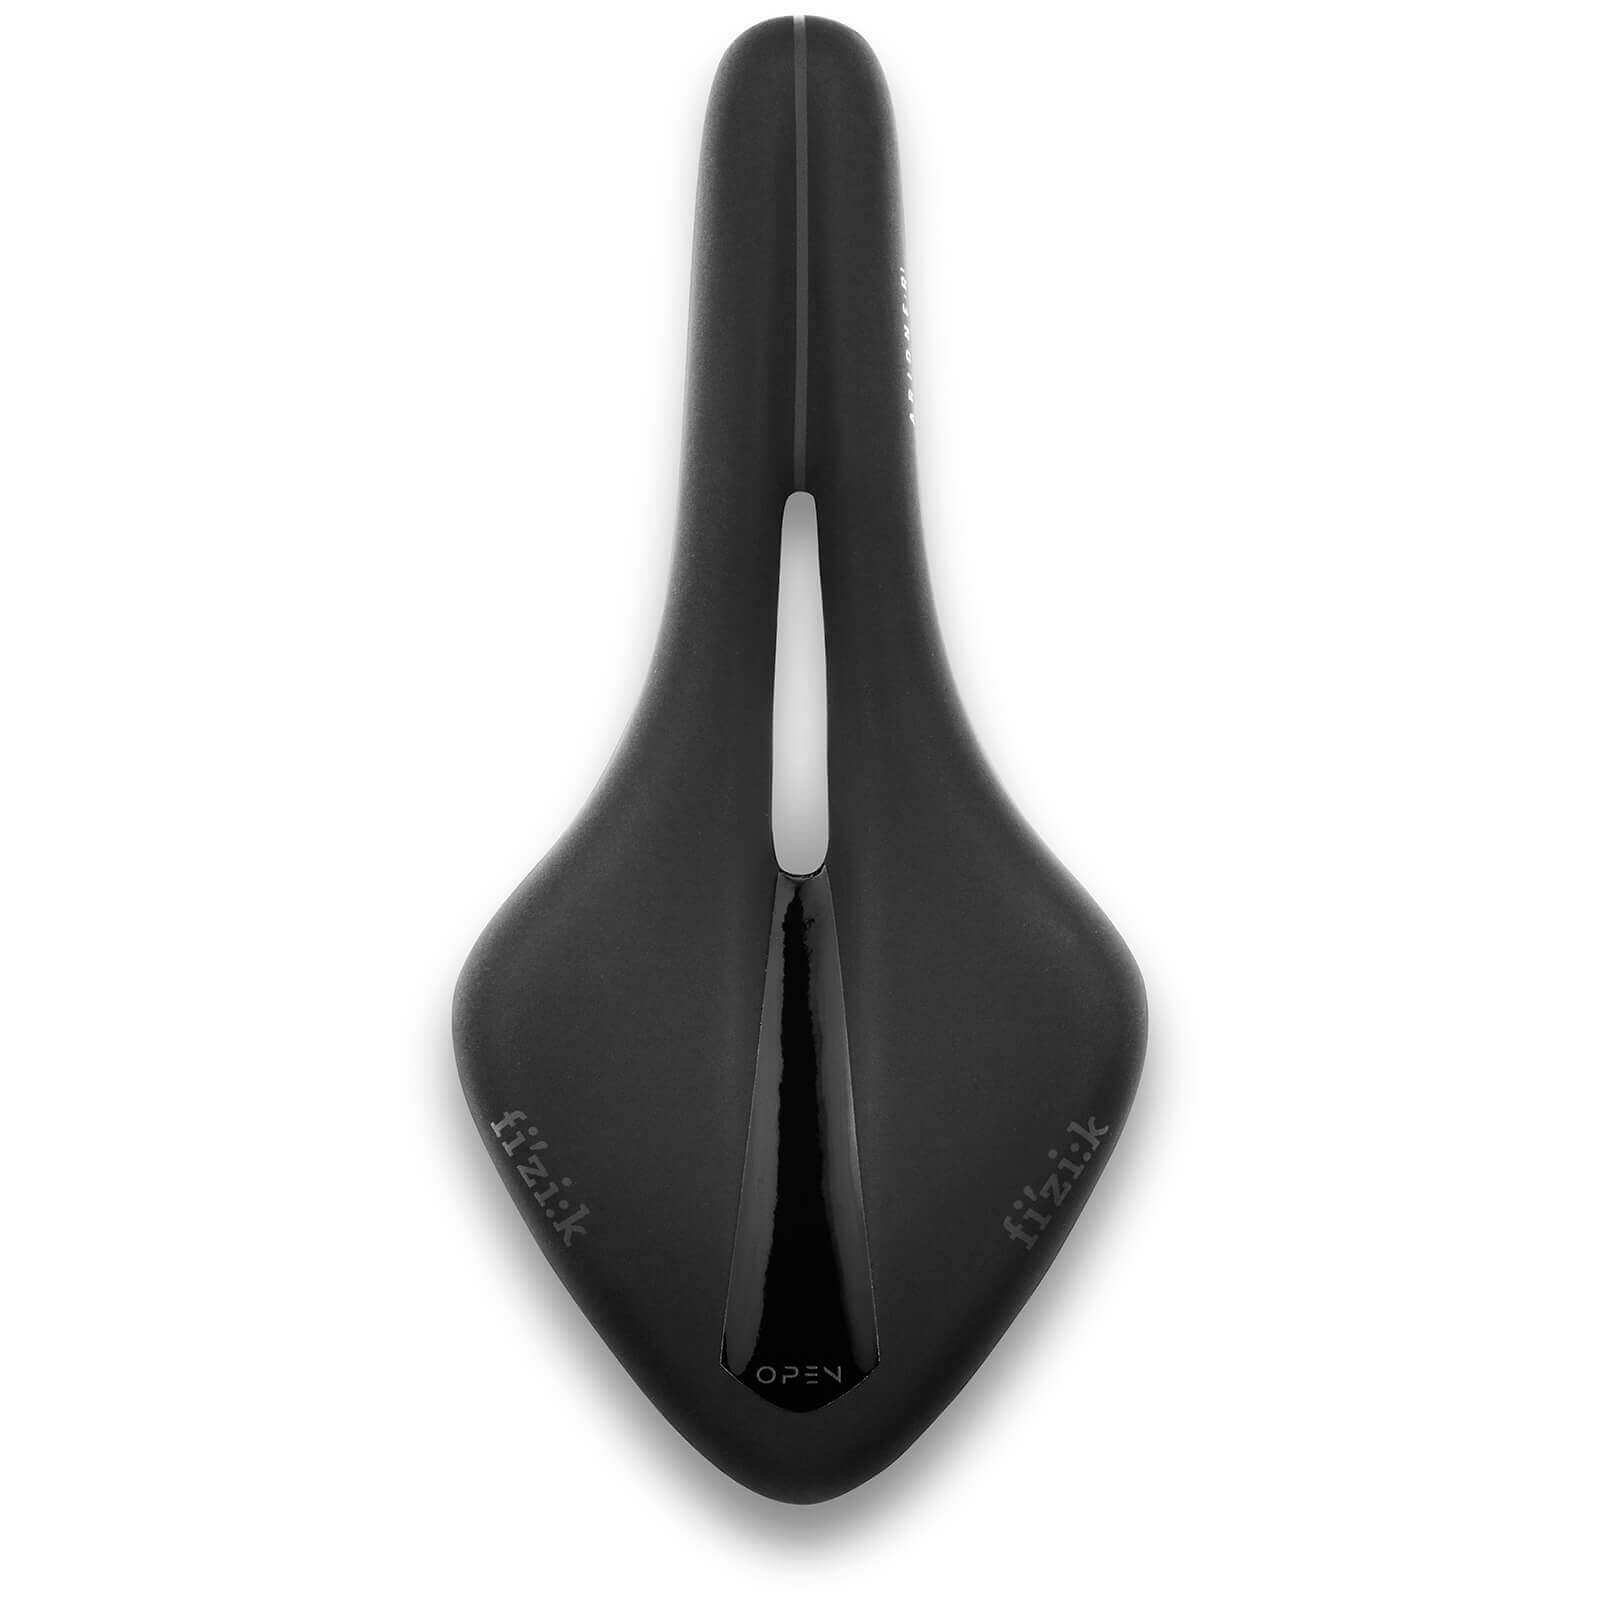 Fizik Arione R1 Open Carbon Braided Saddle - Standard